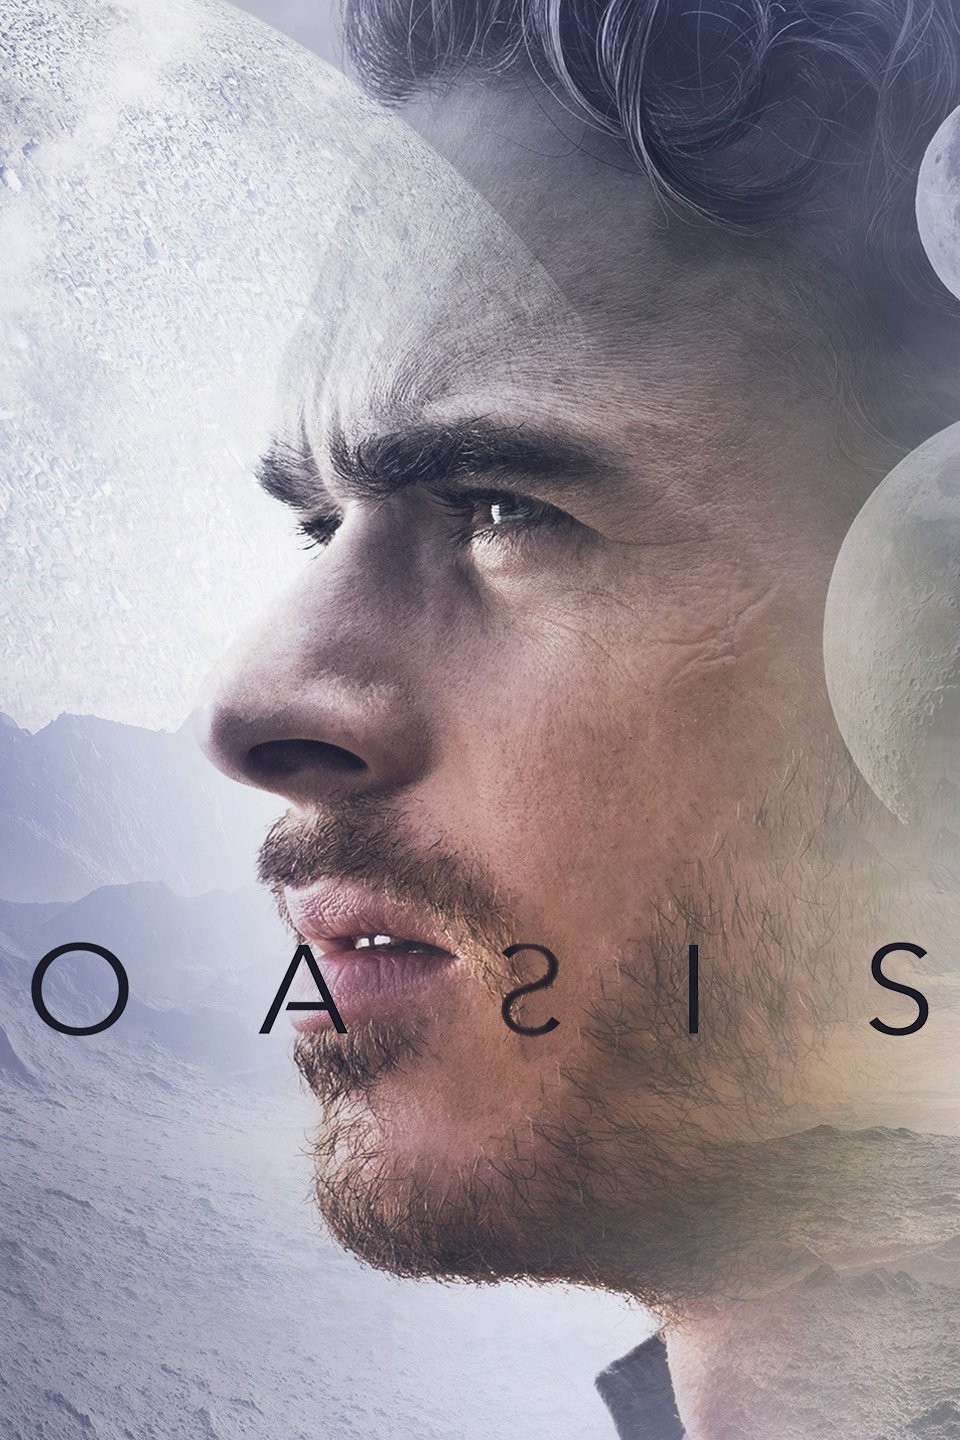 Oscar's Oasis 2 - streaming tv show online